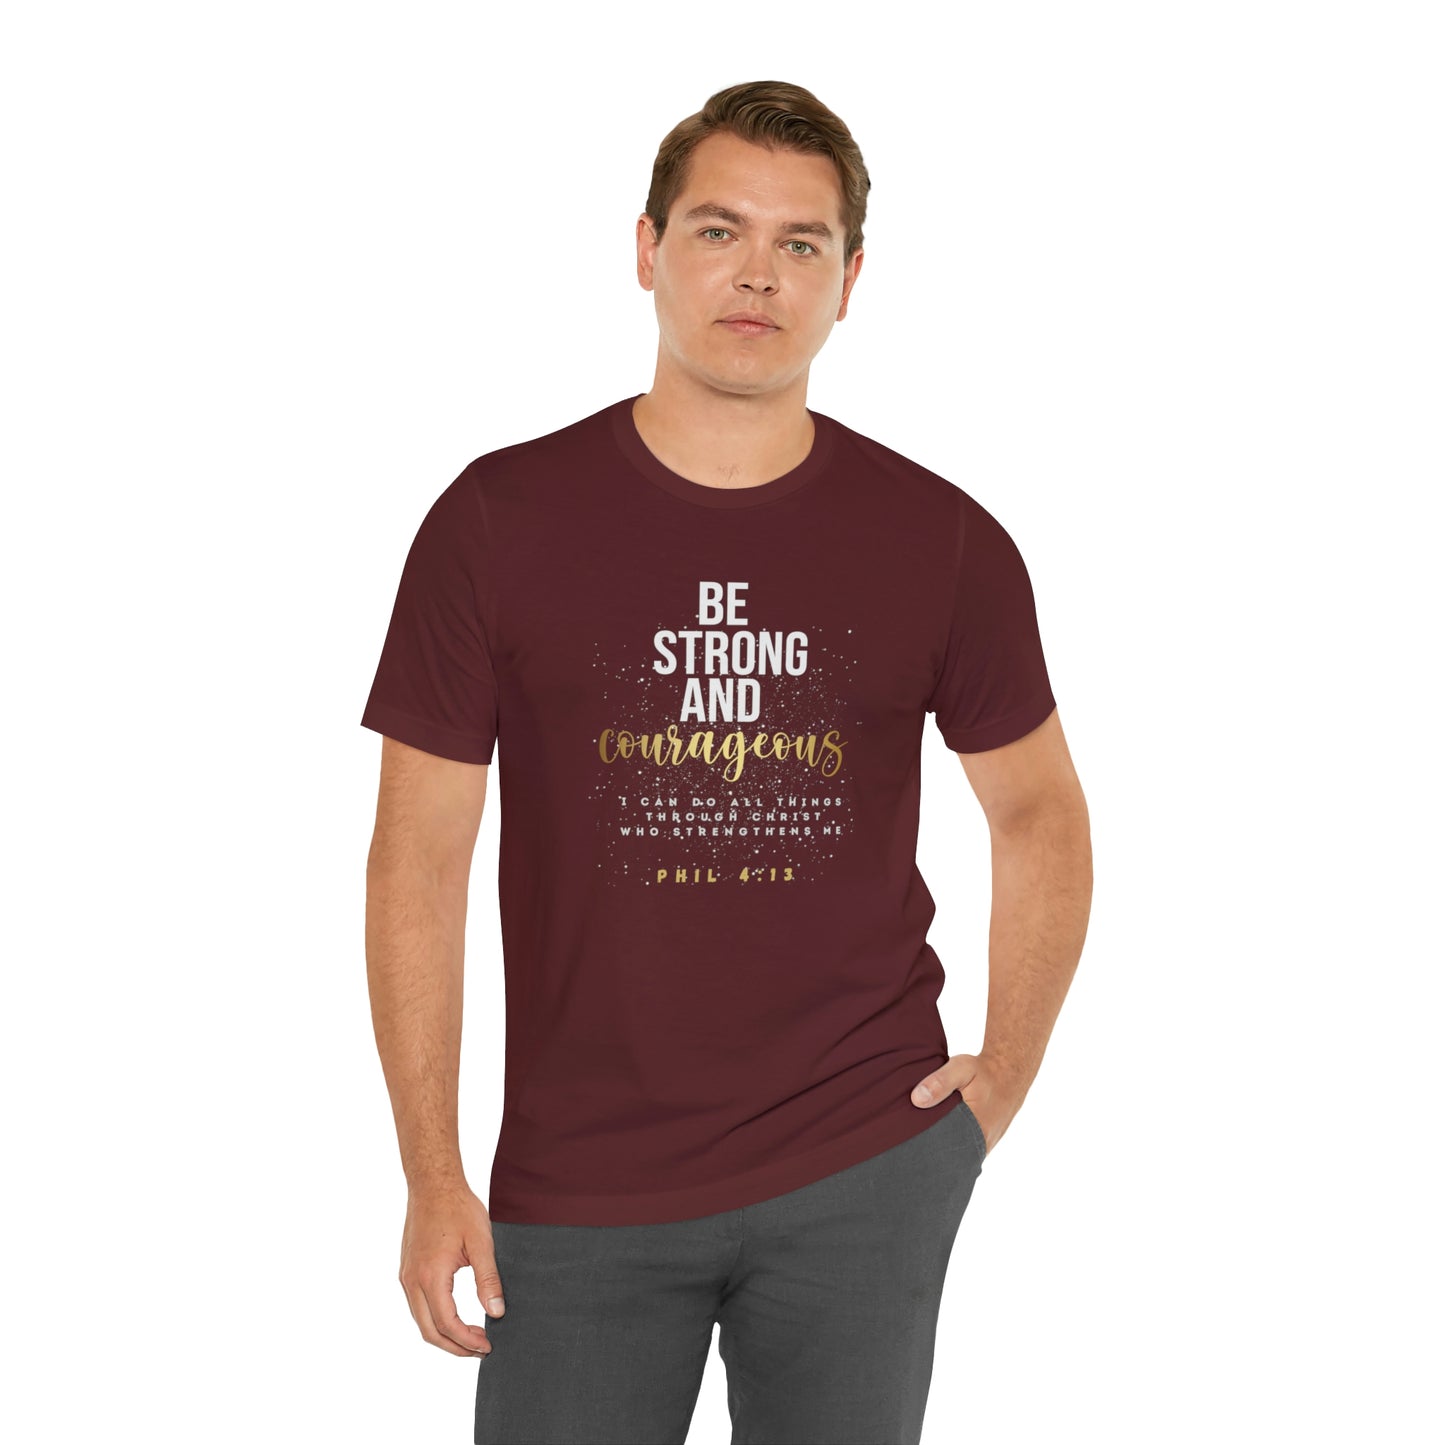 BE STRONG AND COURAGEOUS T-SHIRT